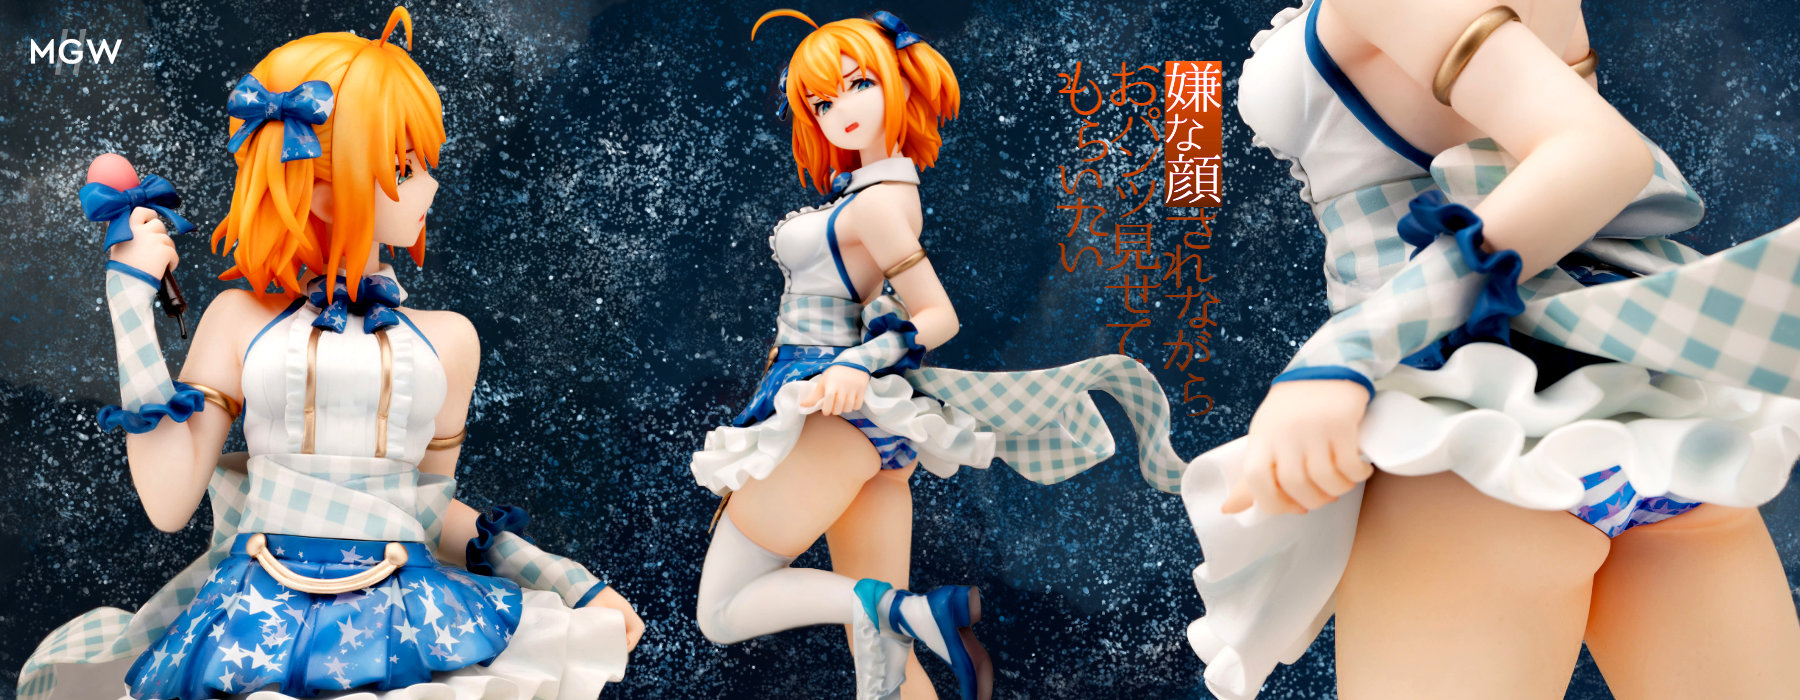 Idol no Yuina by Emontoys from Iyapan with illustration by 40hara MyGrailWatch Anime Figure Guide